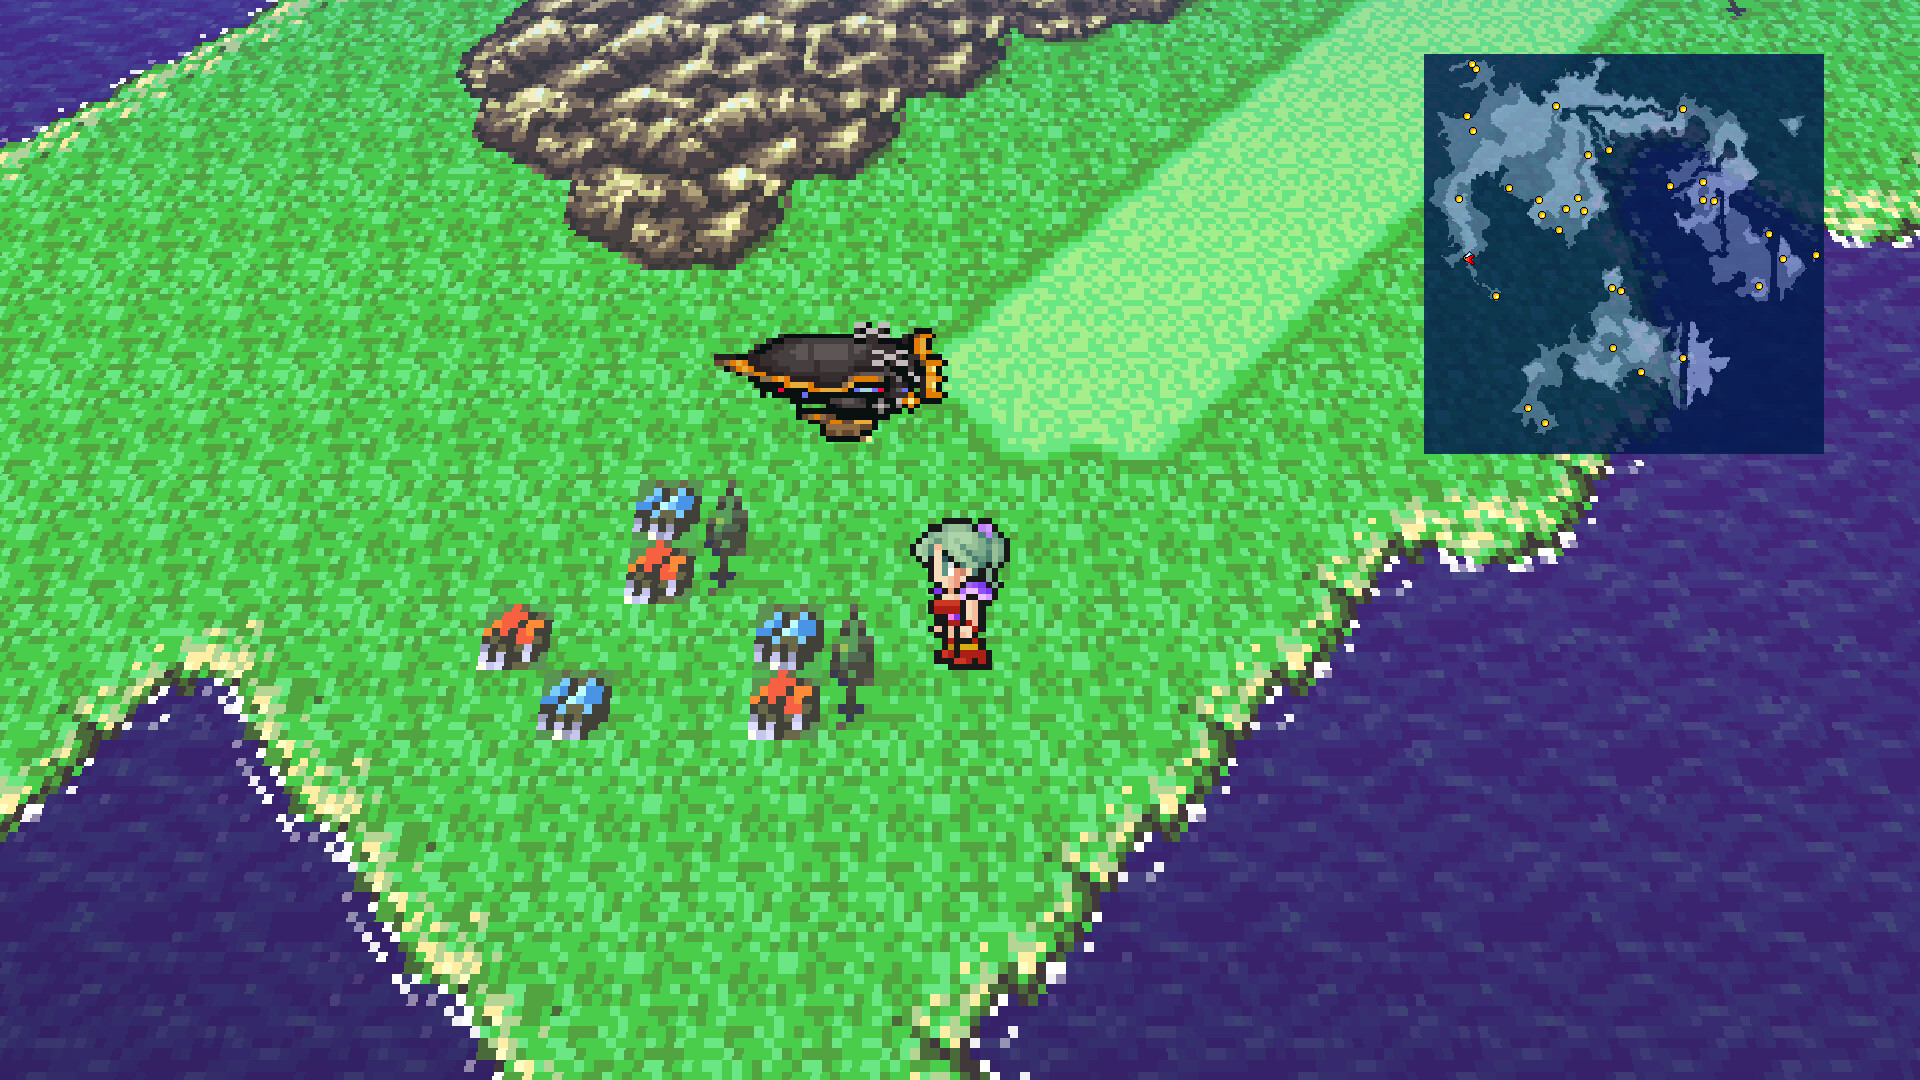 Final Fantasy VI' Still Holds Up Today, if You Can Find the Time